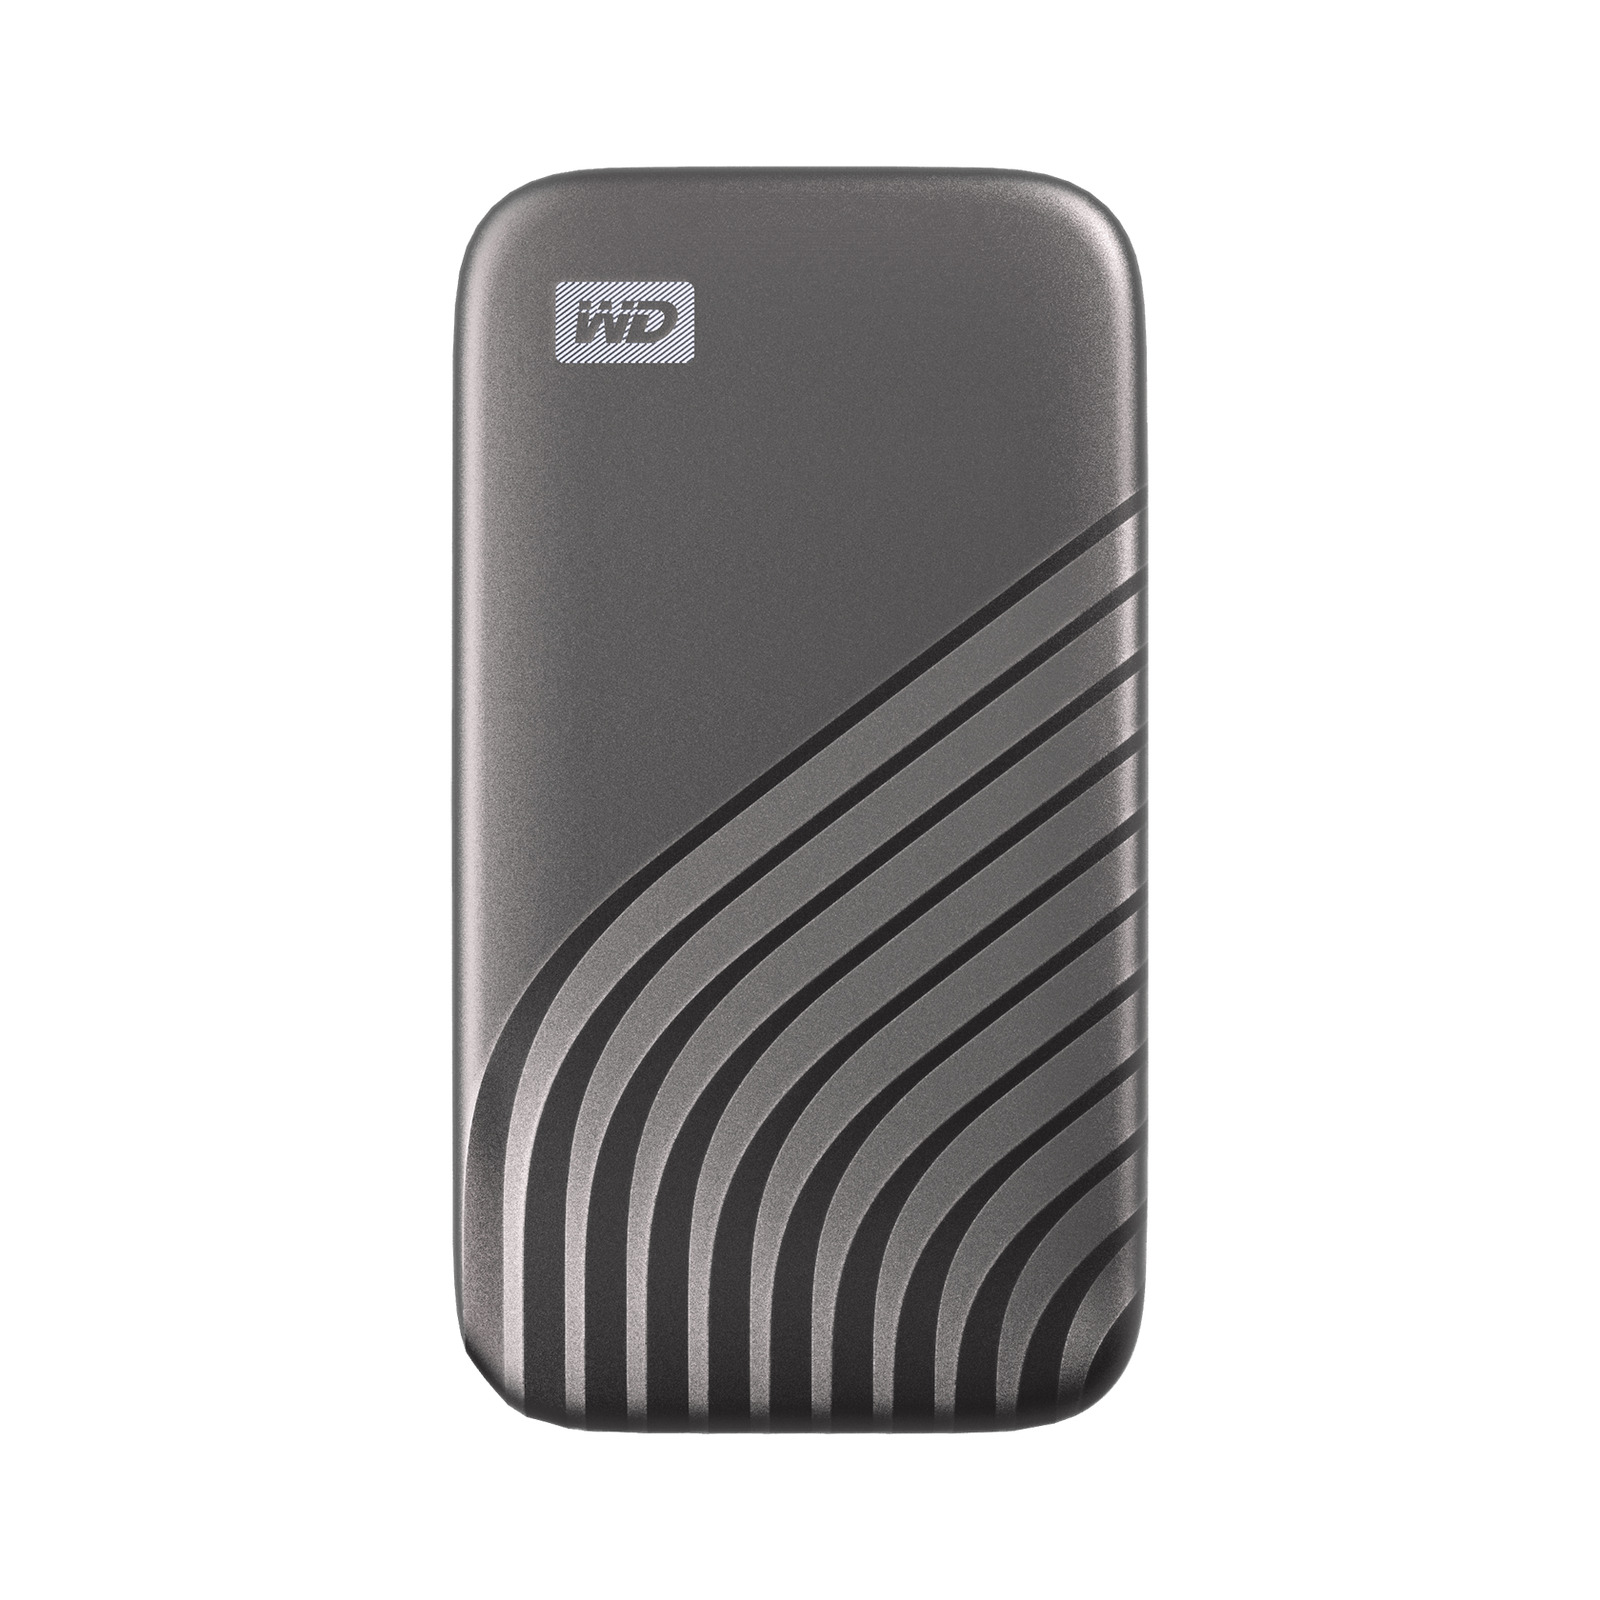 WD 4TB My Passport SSD, Portable External Solid State Drive - WDBAGF0040BGY-WESN